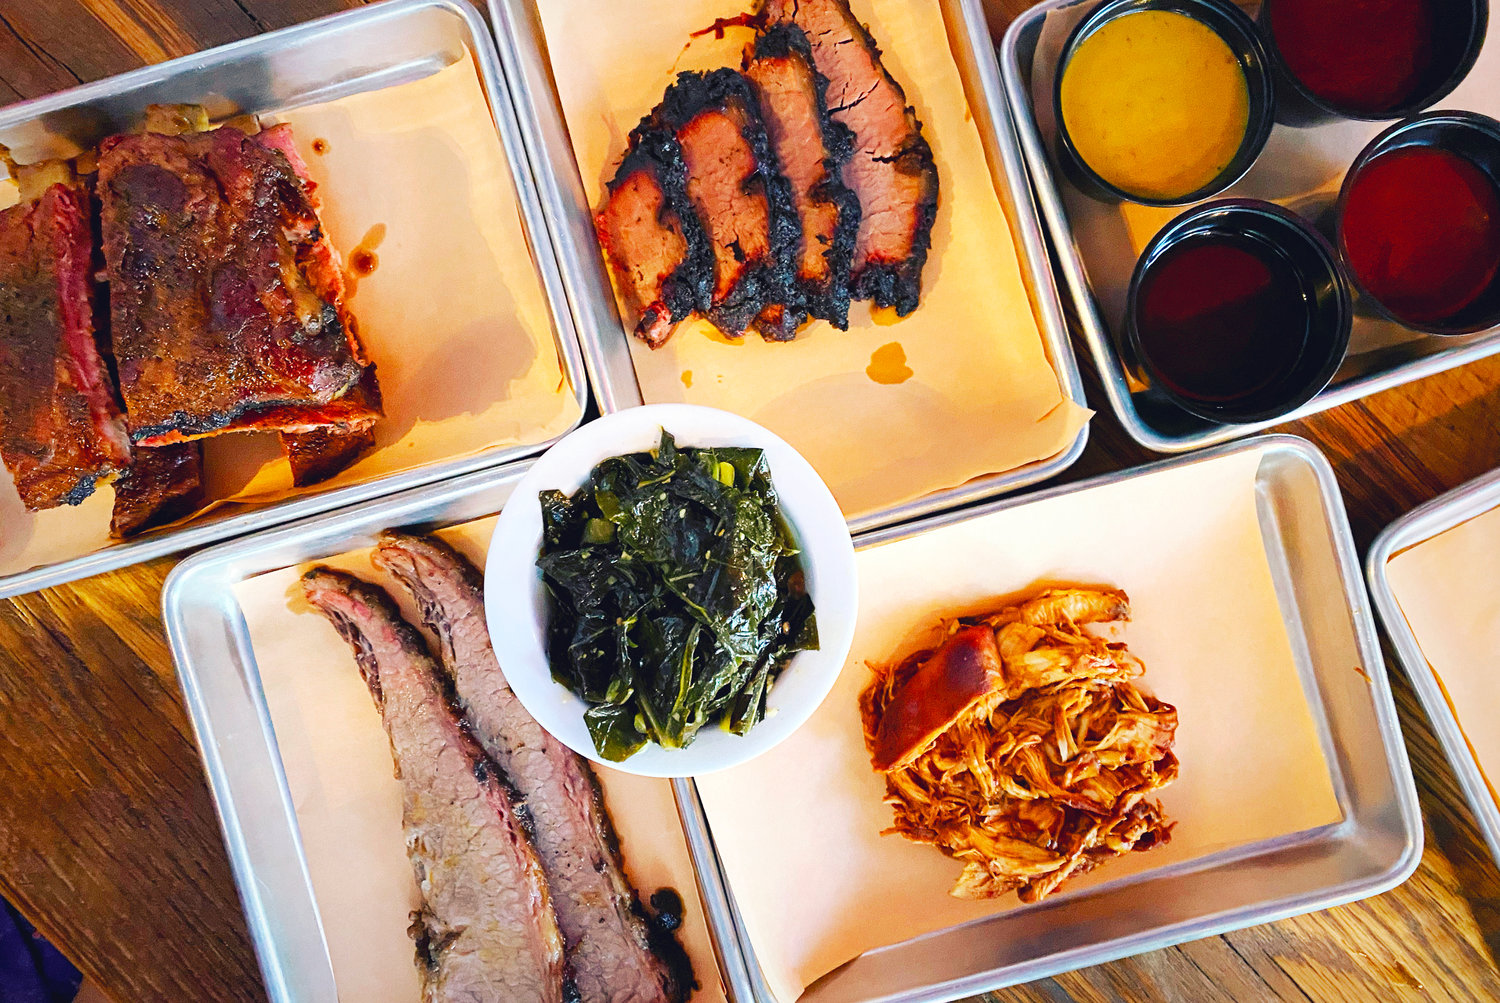 Competition-winning St. Louis-style ribs, brisket, sauces, and sides